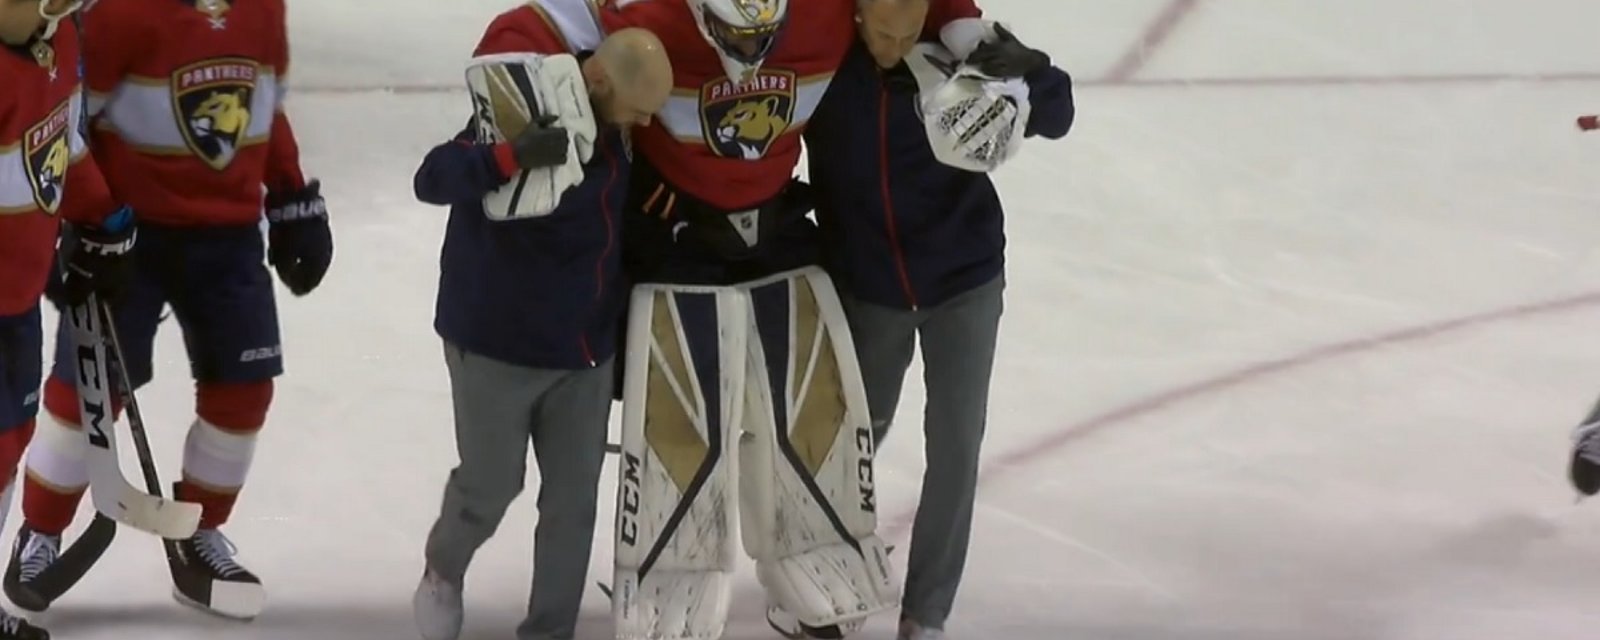 Breaking: Luongo carried off the ice by trainers after serious looking injury.